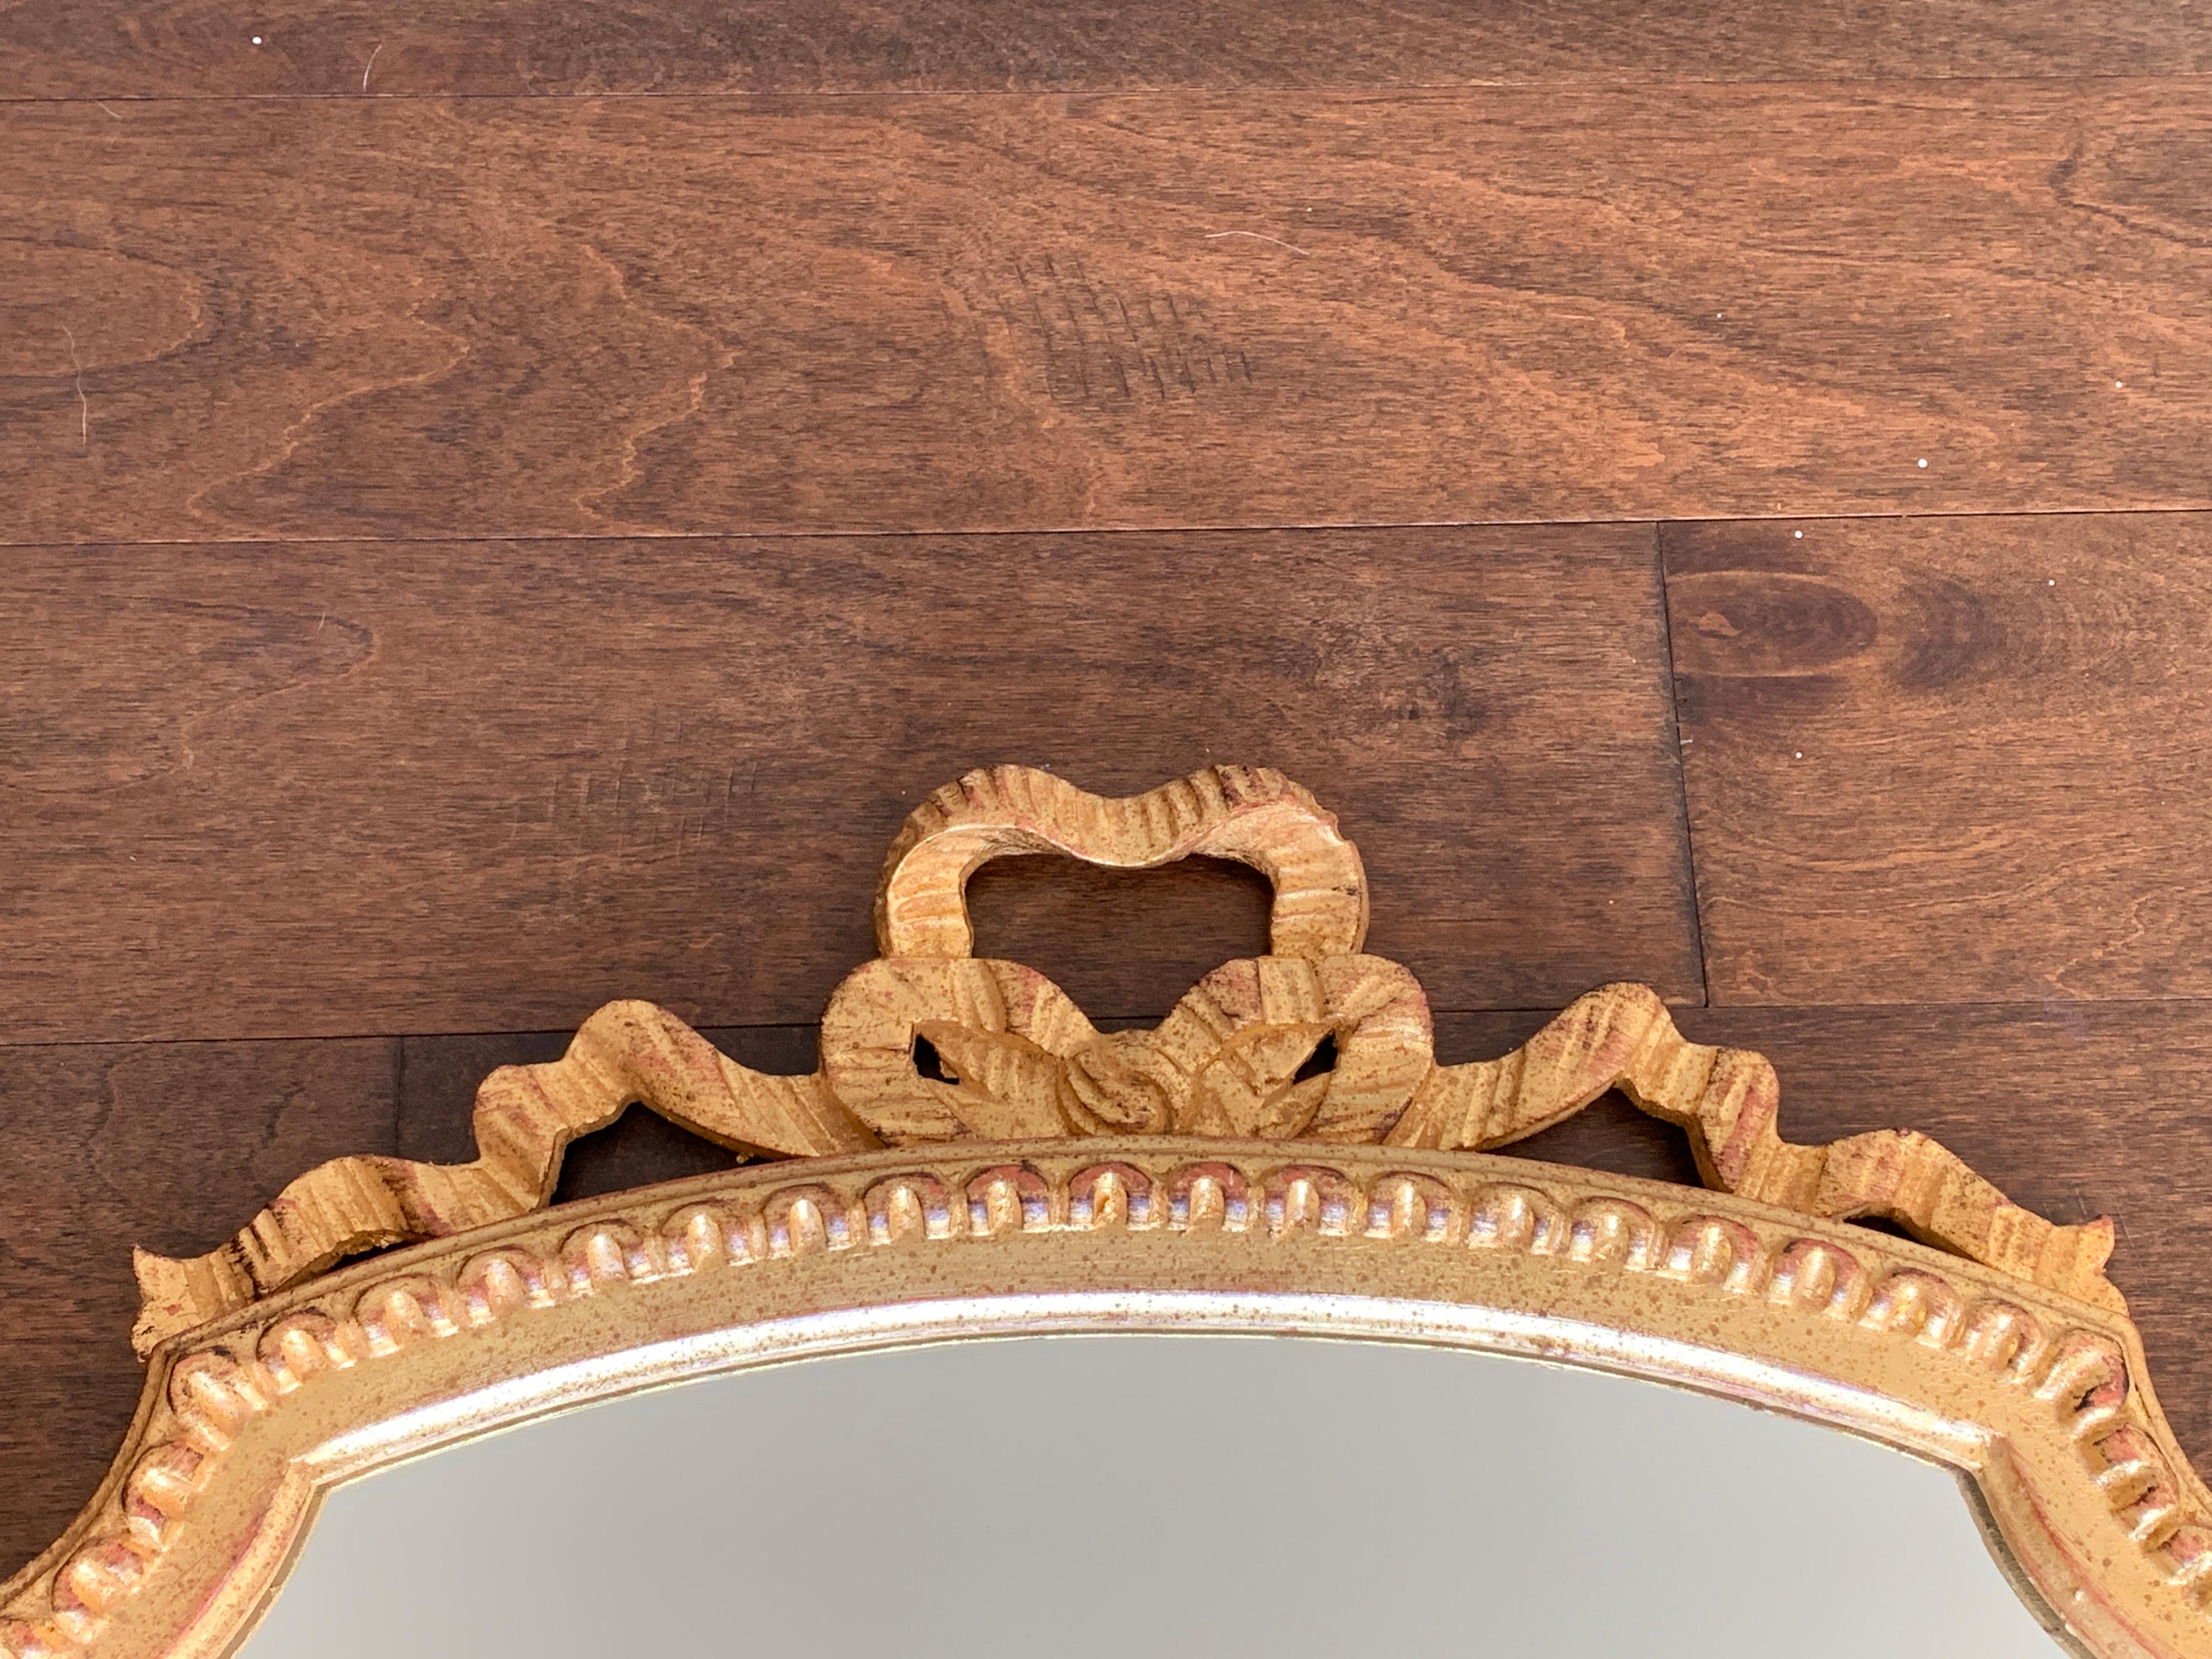 Listed is a gorgeous, Italian giltwood mirror, circa 1950s. The piece has a thick, scalloped wood frame with ribbon detailing. Slight hints of red undertones peak out from beneath the gilding. Heavy, weighing 16lbs. Newly rewired for hanging on